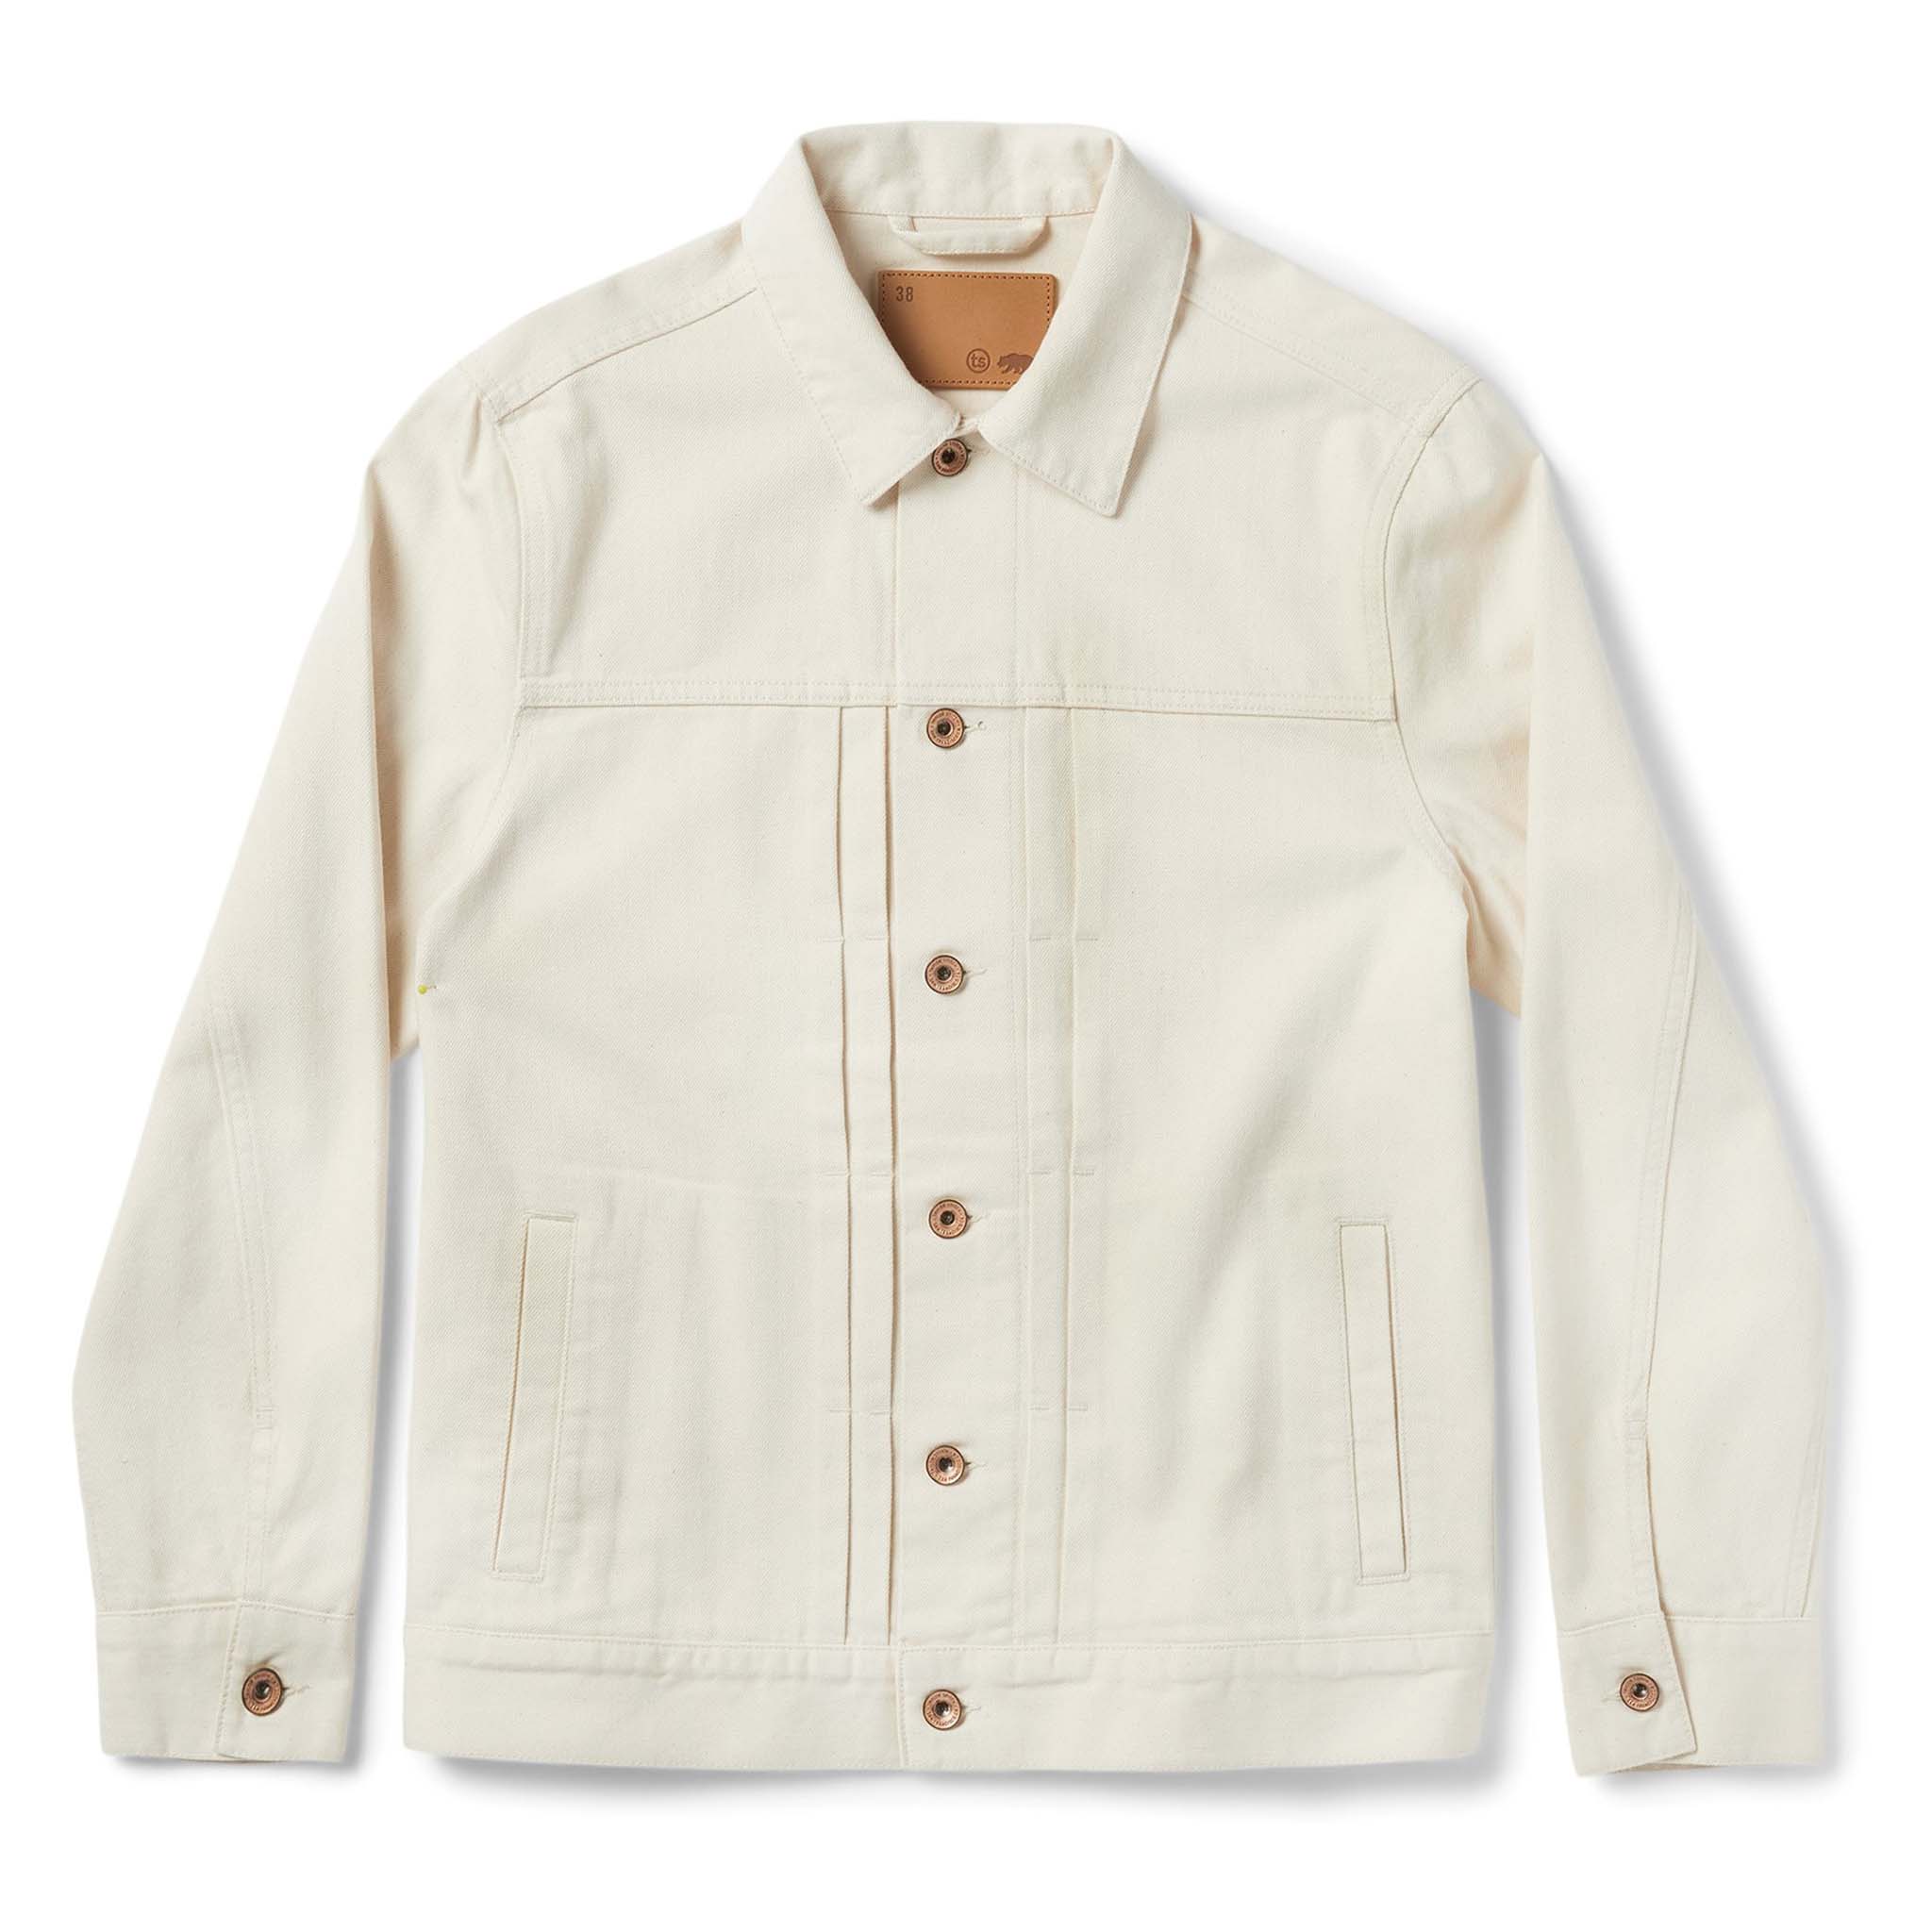 The Dispatch Jacket in Natural | Taylor Stitch - Classic Men’s Clothing